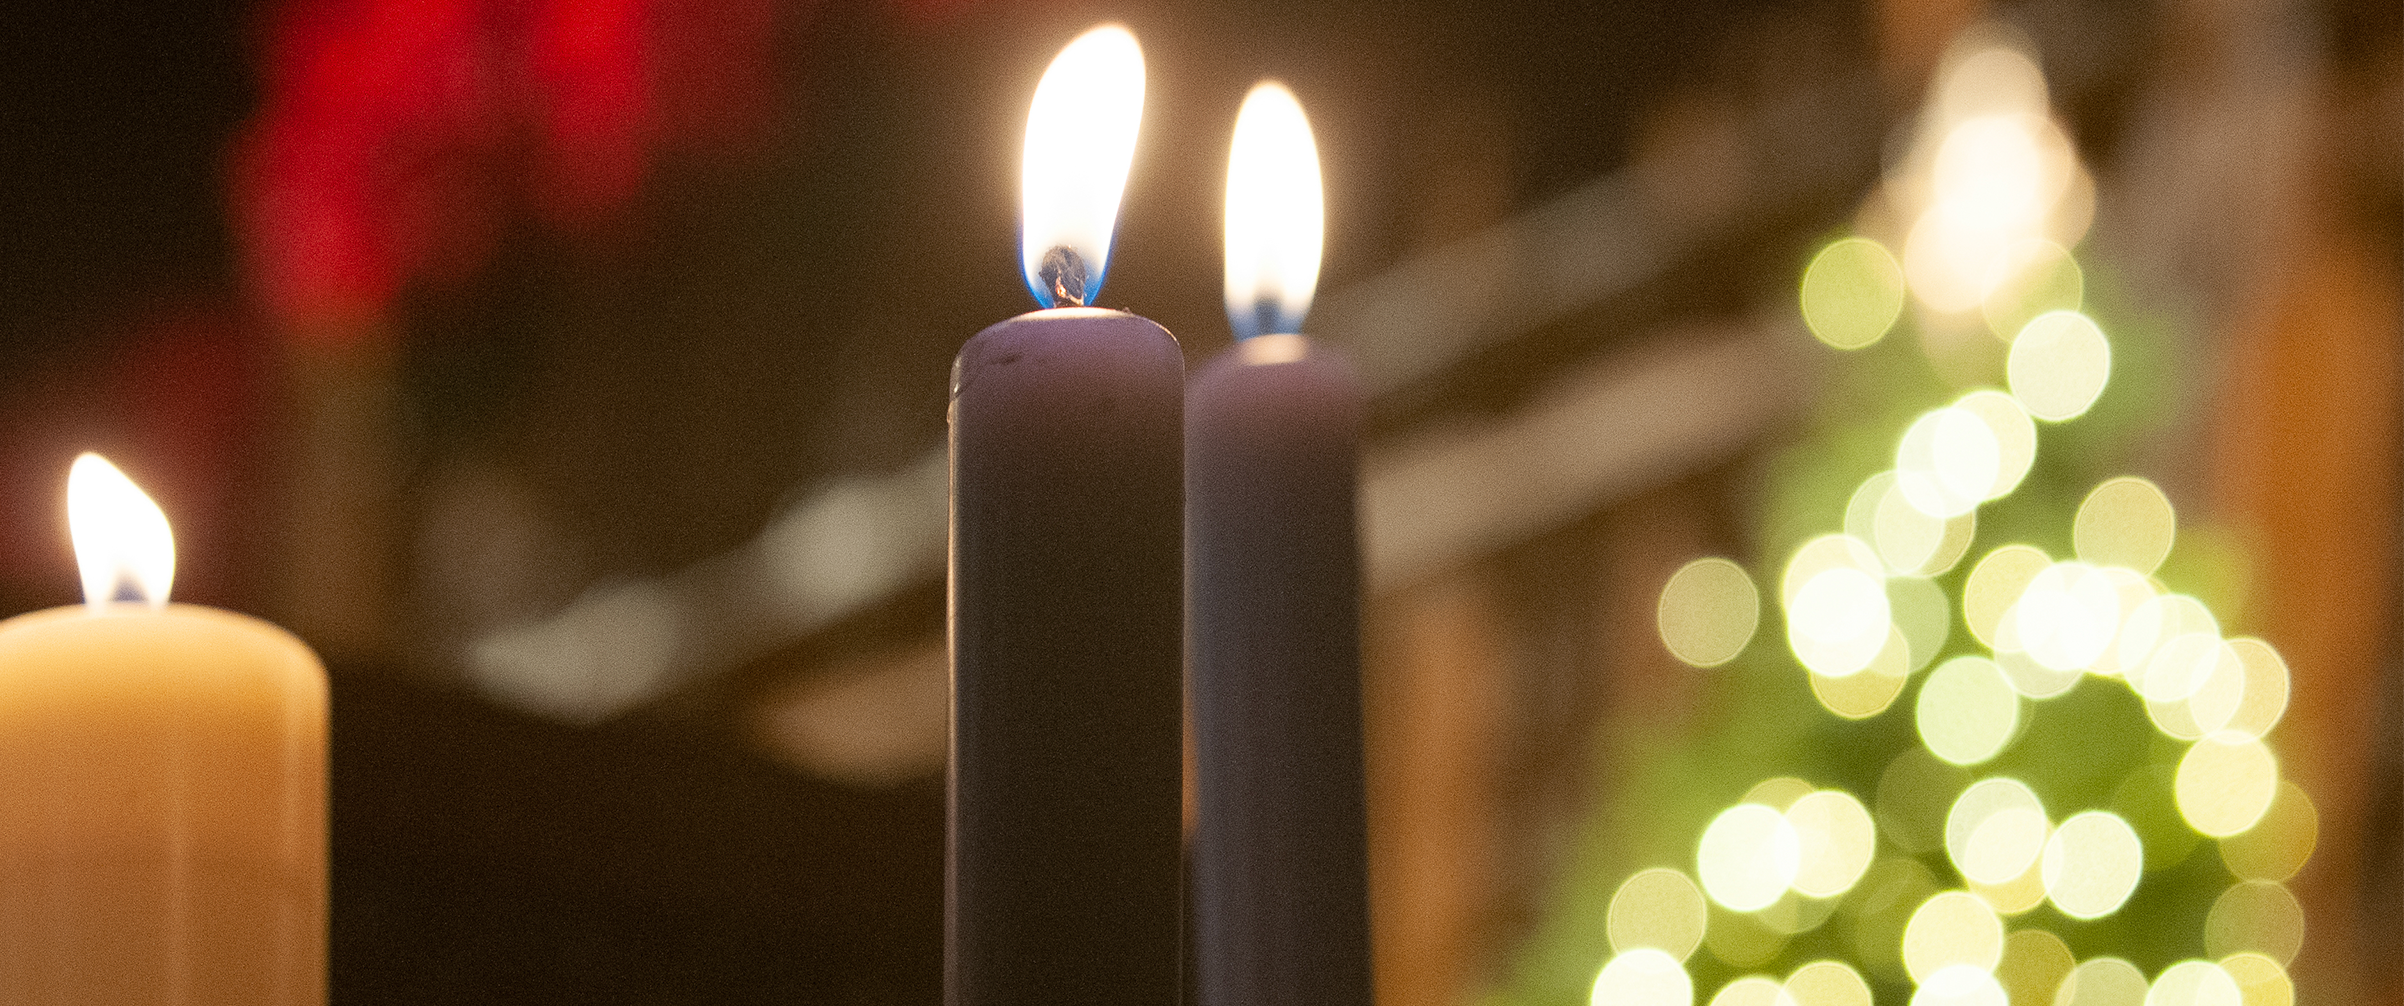 Unto Us A Child is Born: Advent, Isaiah and our Jewish Neighbors